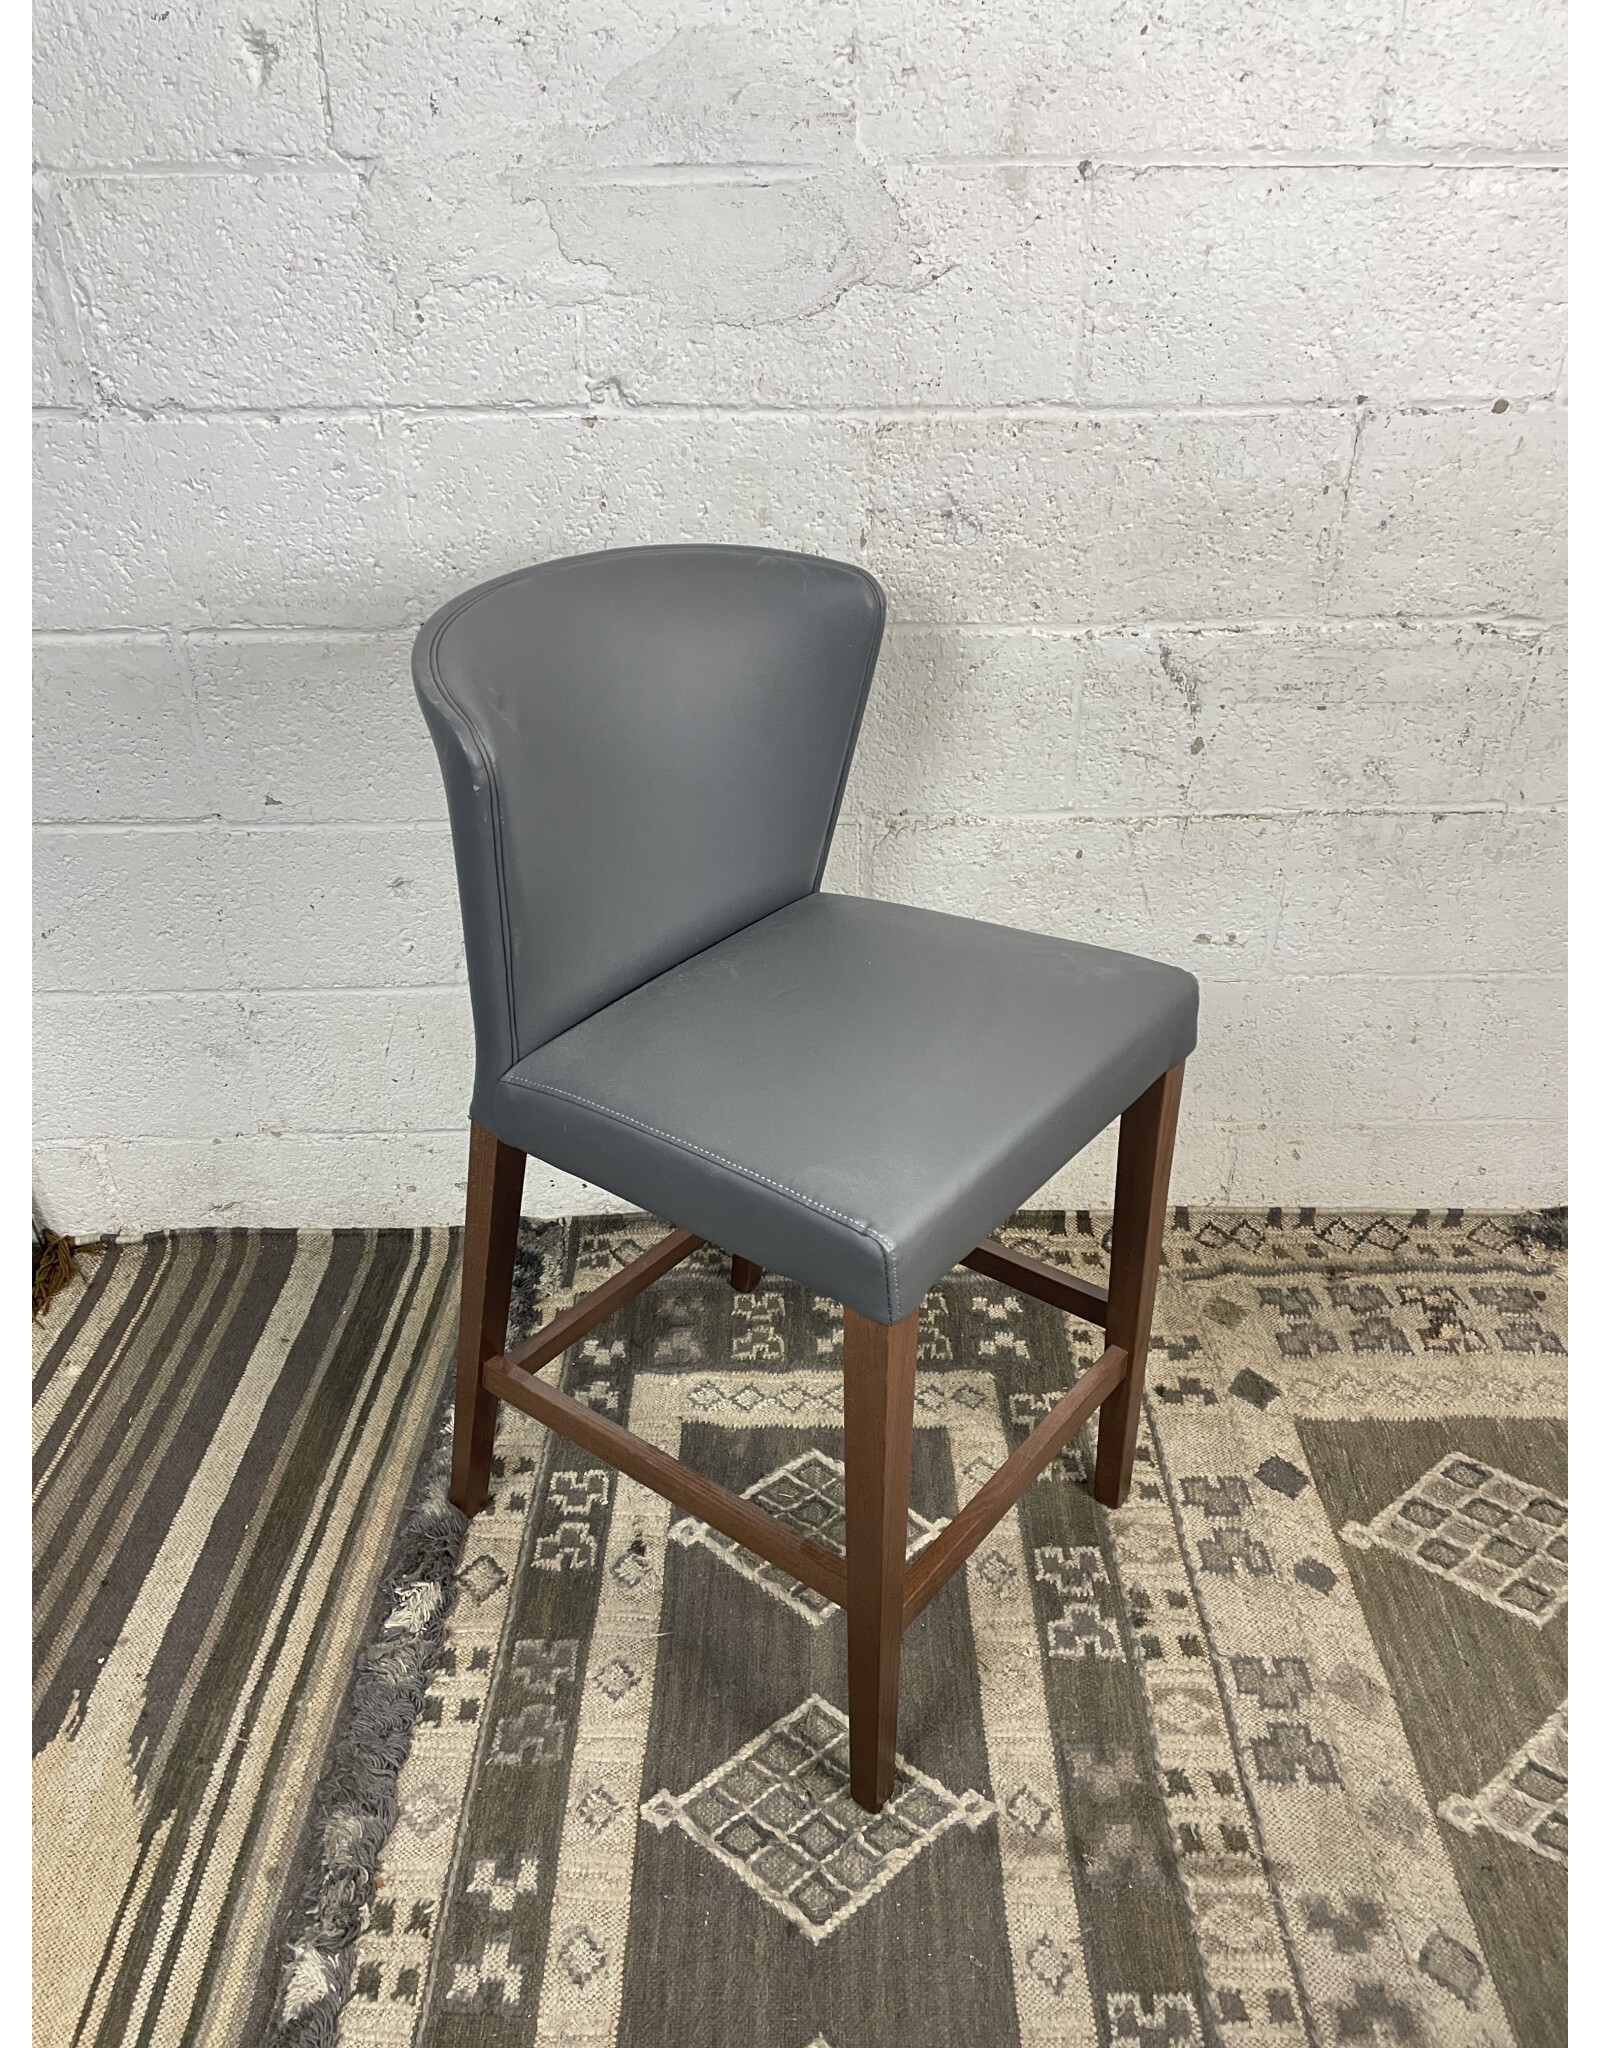 Crate & Barrel Curran Dining Chair